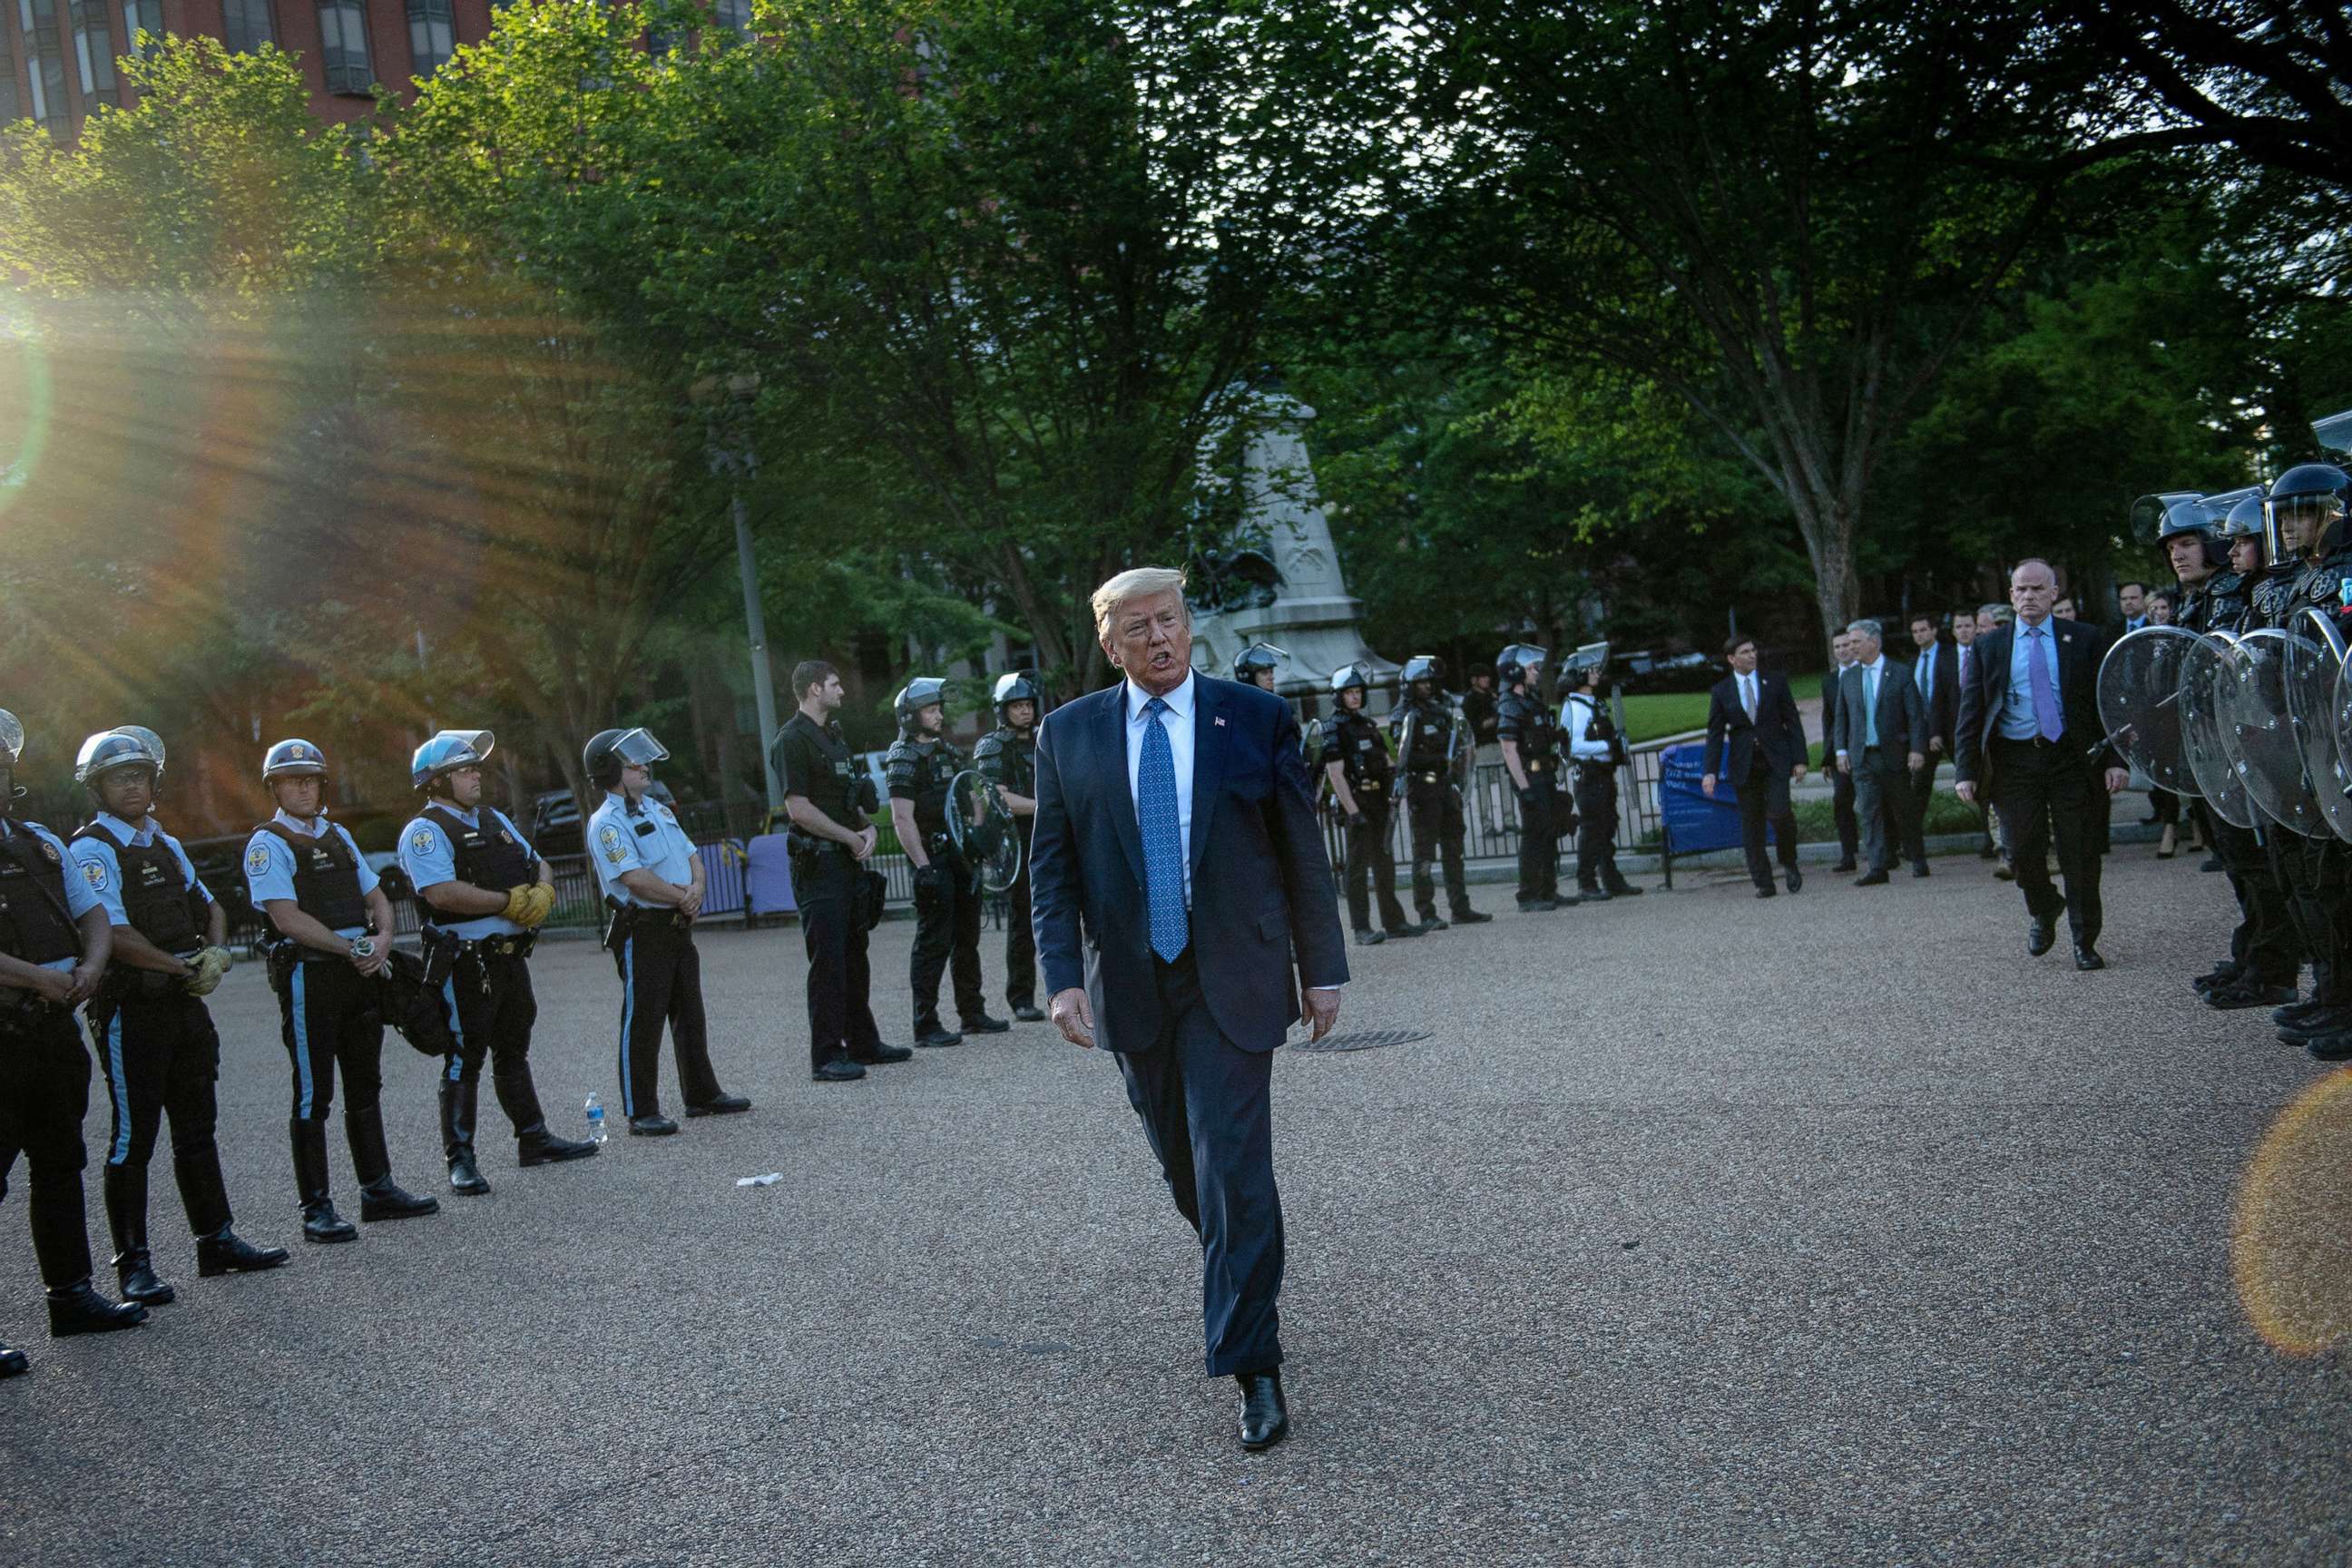 PHOTO: President Donald Trump leaves the White House on foot to go to St John's Episcopal church across Lafayette Park for a photo-op, in Washington, D.C., June 1, 2020, after police cleared the area of demonstrators.